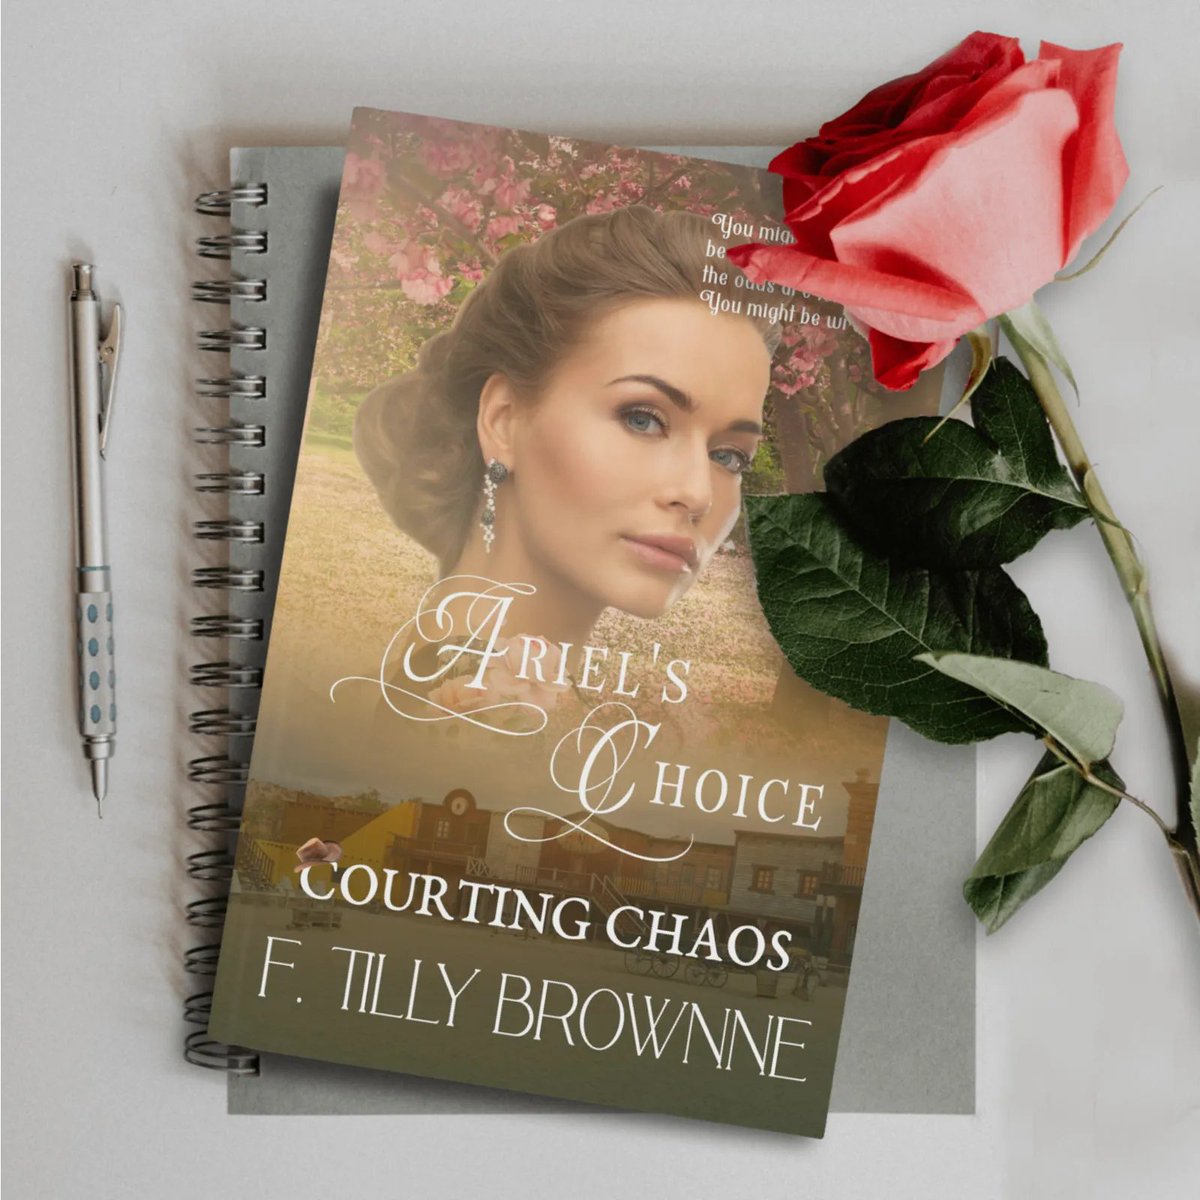 #Kindle #Available now! Book 12 in #CourtingChaos #series: Ariel's Choice: 4 women, 4 men, all courting. Let the chaos begin! Love #historicalromance? You'll love this 1890s romance with heartwarming moments. buff.ly/3WckpBX #IARTG